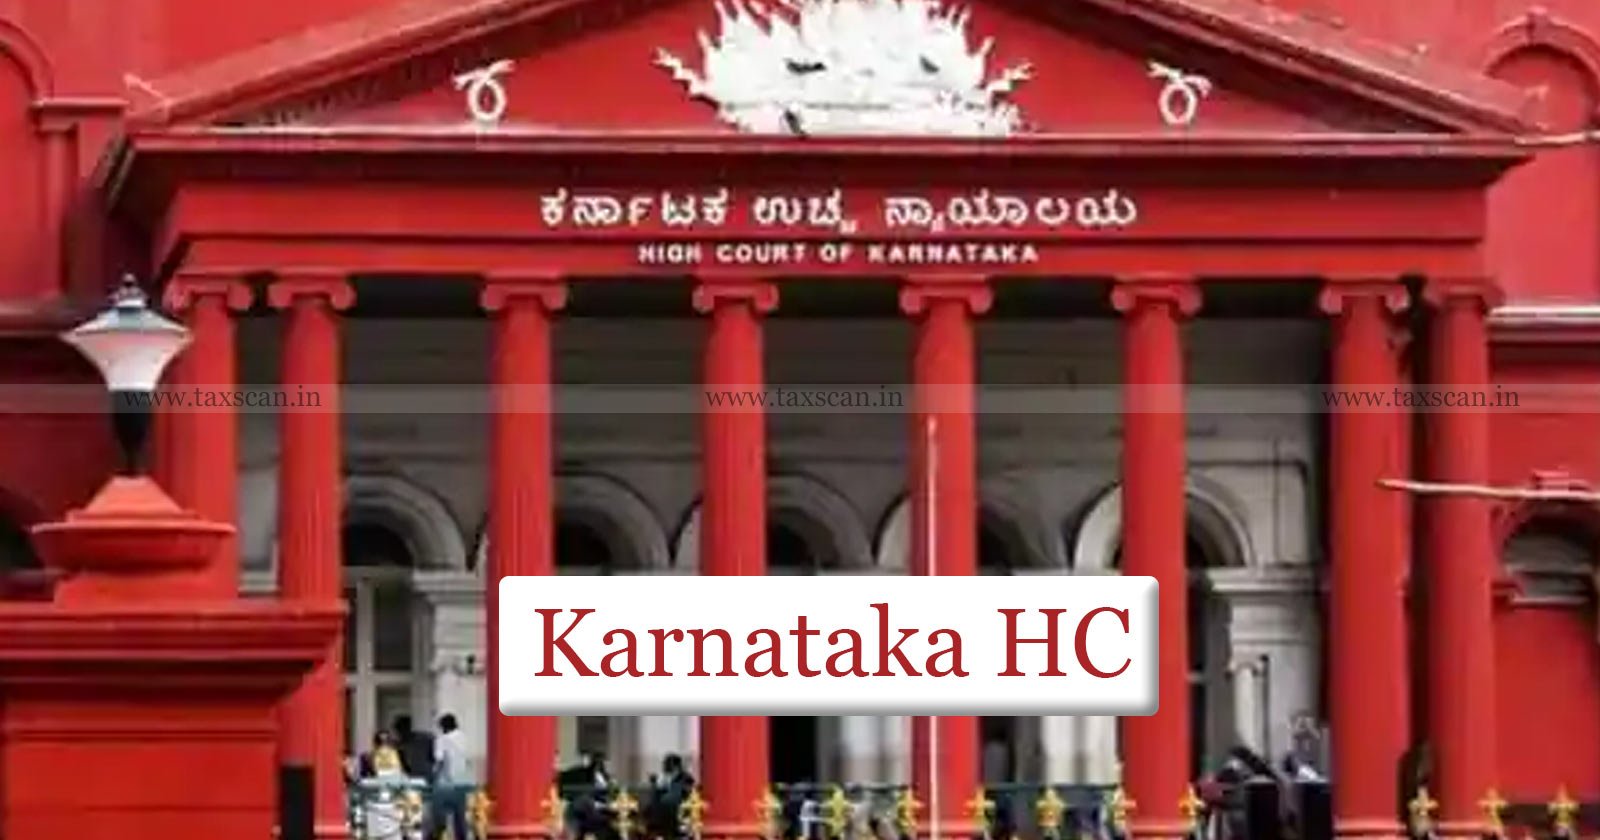 Direction to Declare - KGST Rules - Ultravires Constitution - Karnataka HC dismisses WP - TAXSCAN